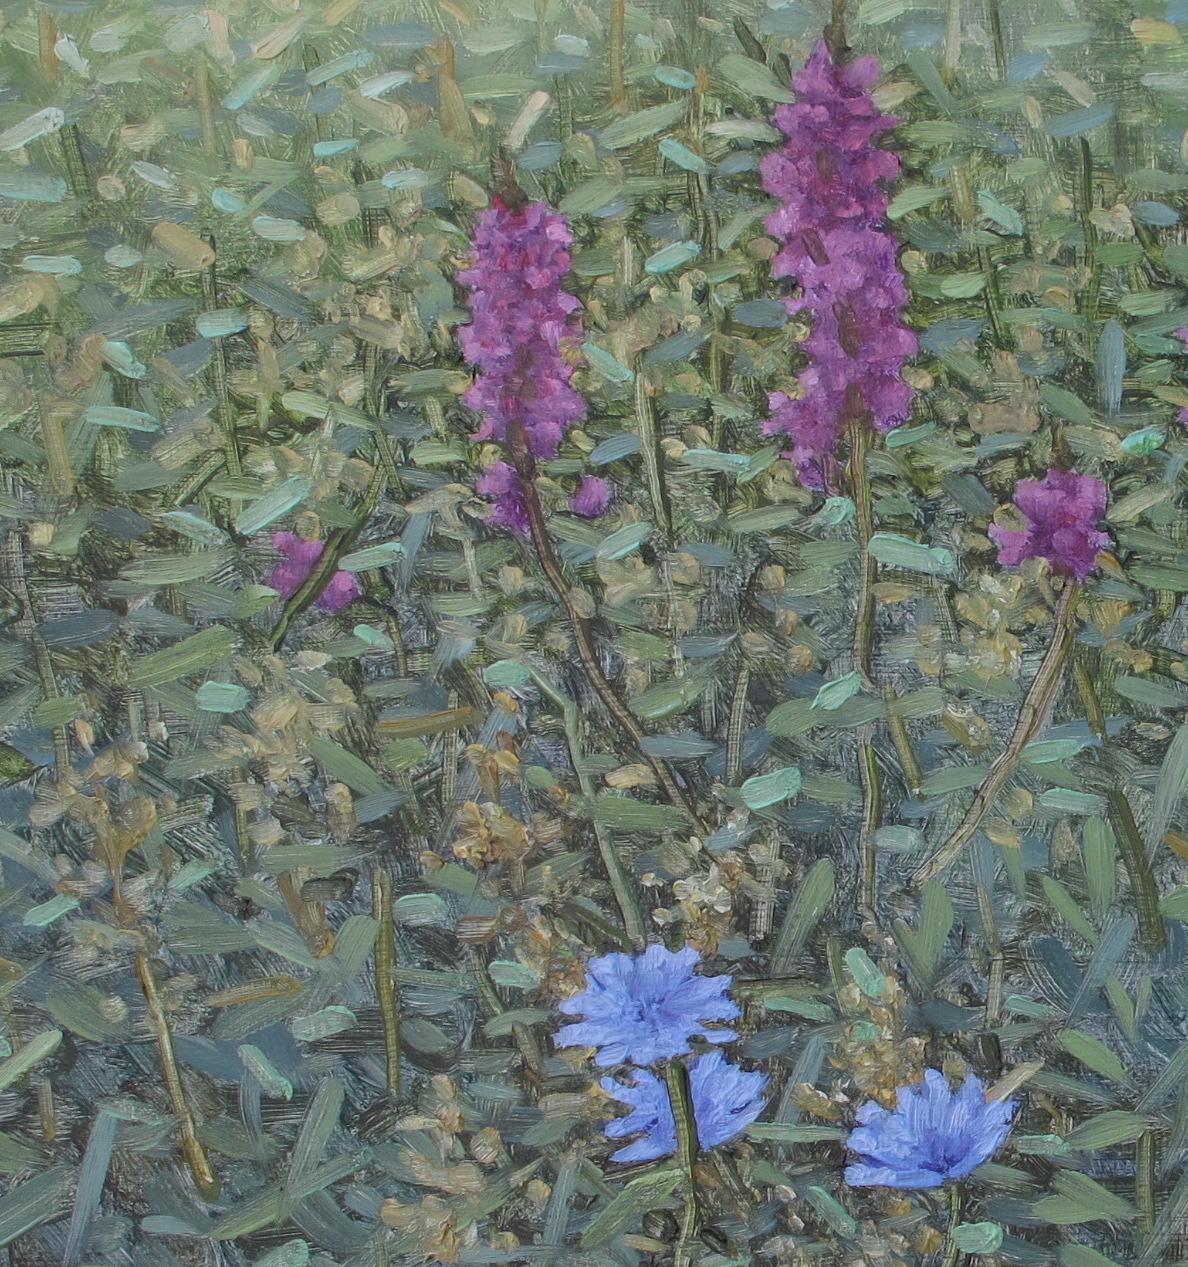 Performance, Square Botanical Landscape, Purple and Blue Flowers in Green Field - Gray Landscape Painting by Thomas Sarrantonio